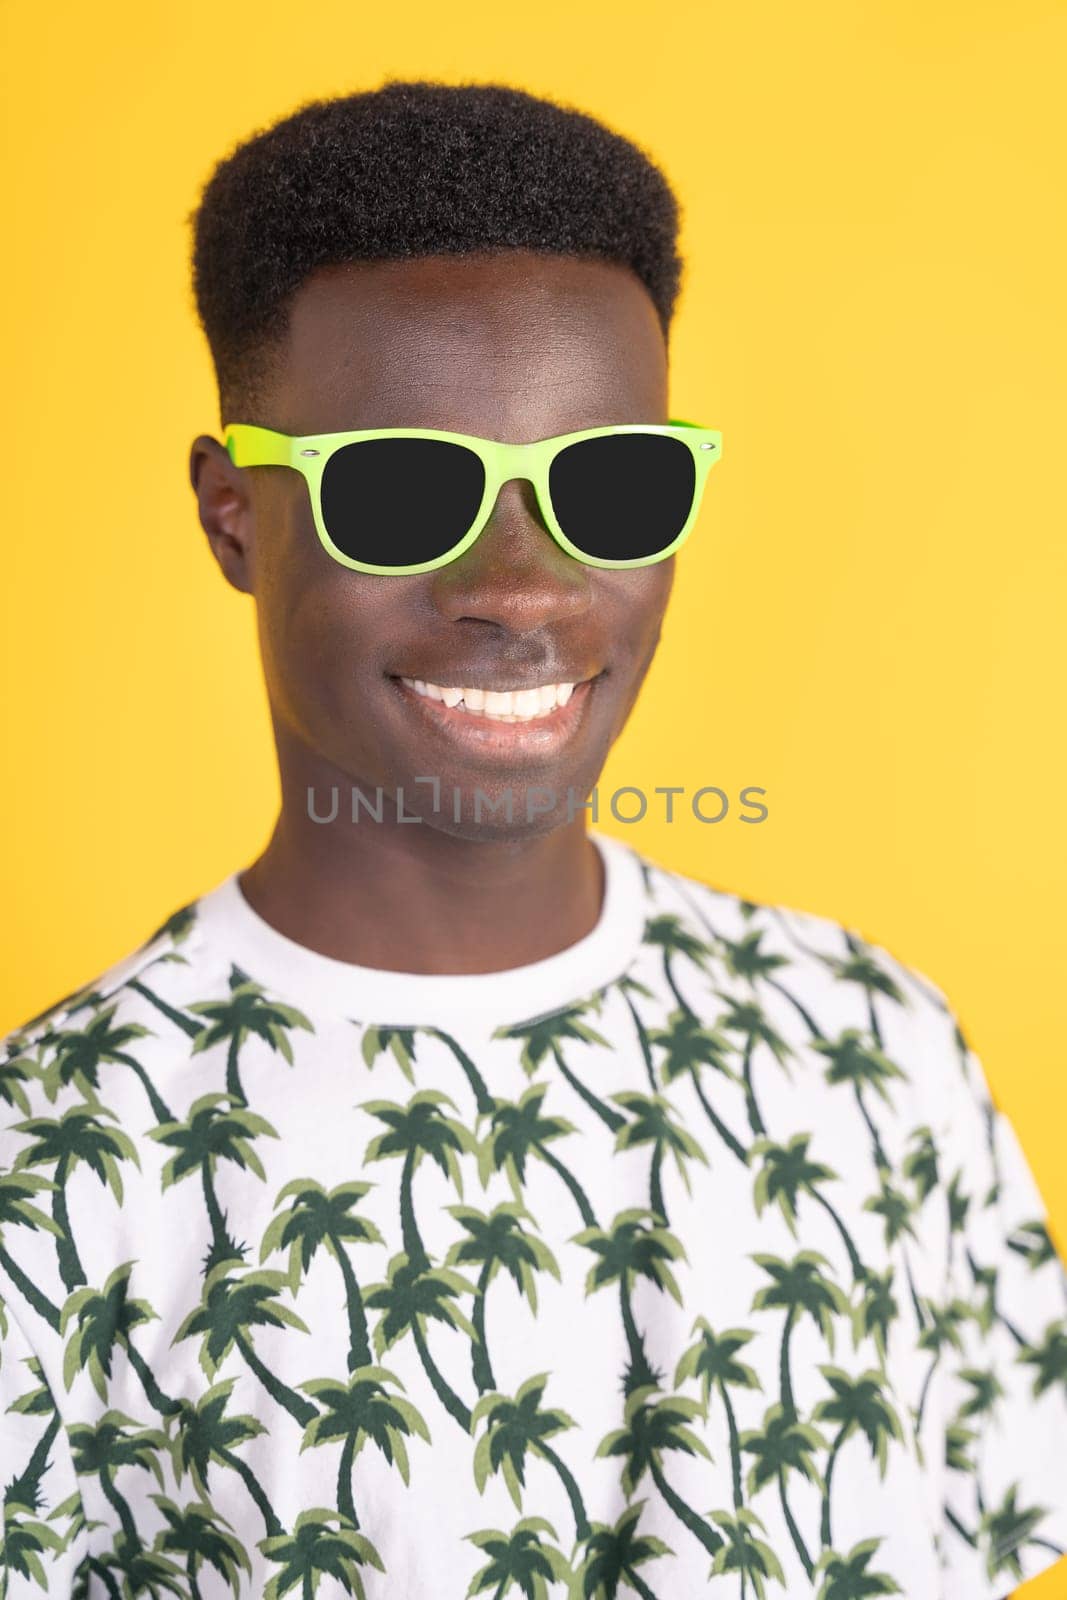 A man with a green pair of sunglasses on his face. He is smiling and wearing a shirt with palm trees on it